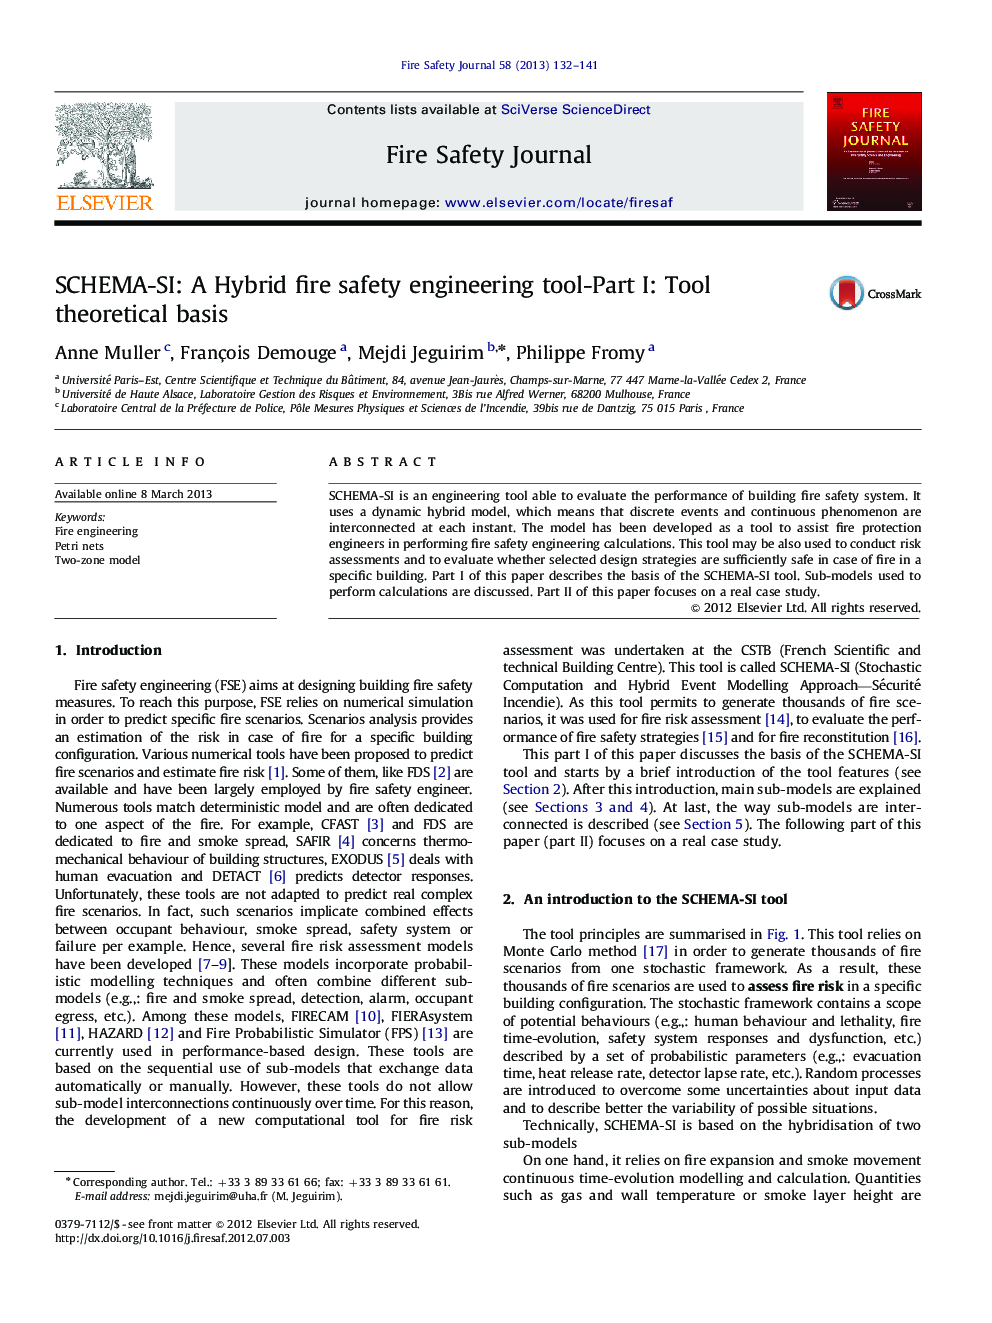 SCHEMA-SI: A Hybrid fire safety engineering tool-Part I: Tool theoretical basis